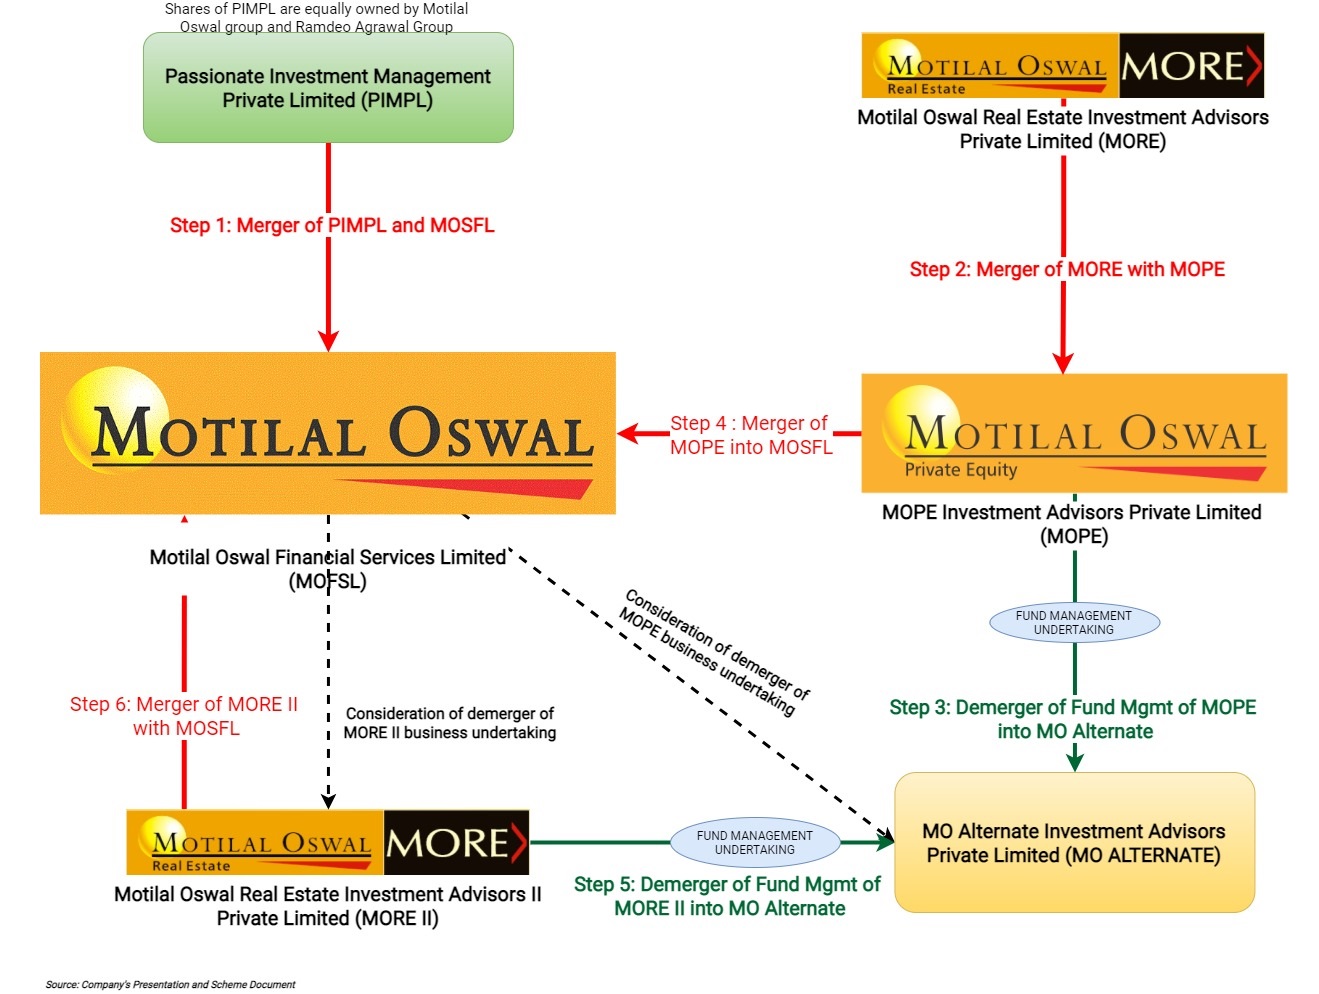 Motilal-Oswal-Financial-Services-Group-Consolidation-Fund-Management-1